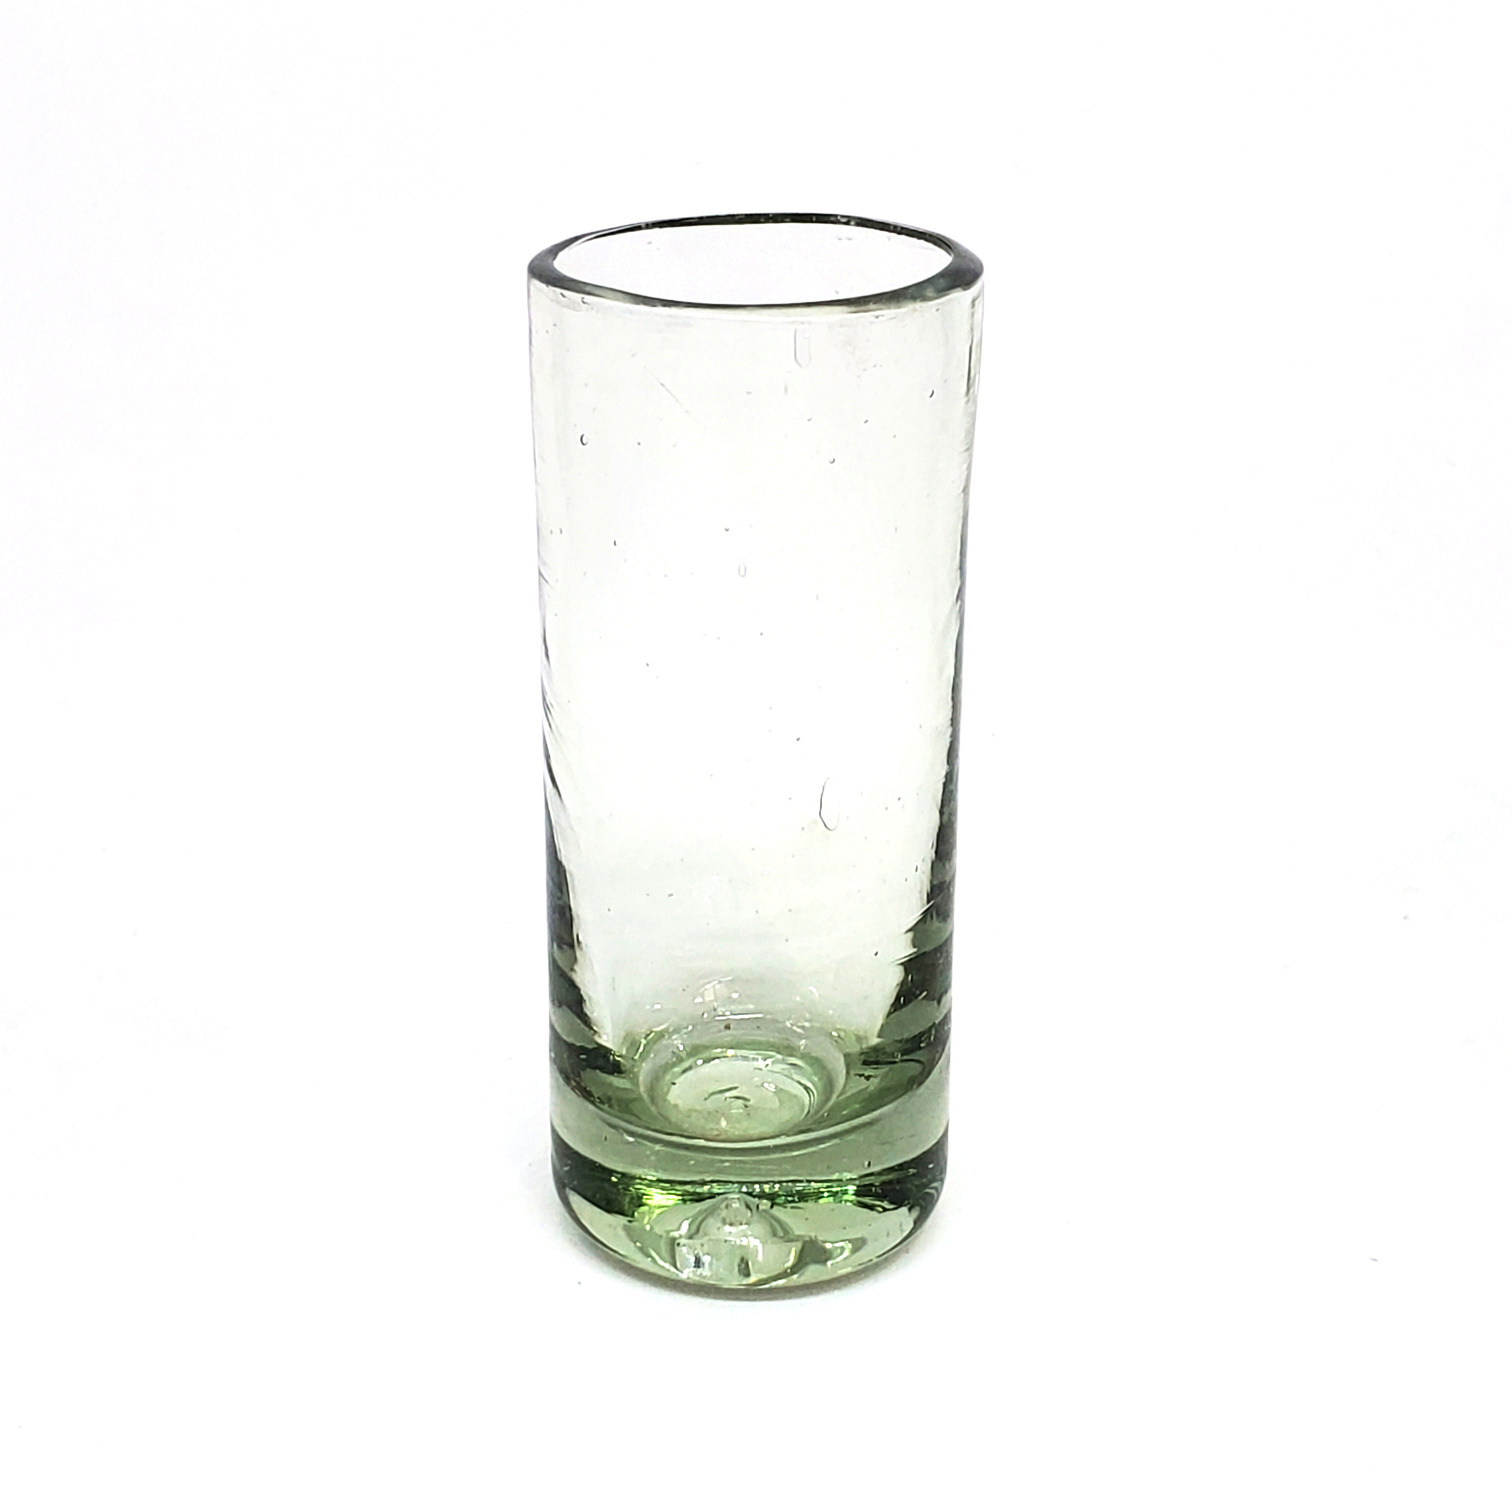 MEXICAN GLASSWARE / Clear 2 oz Tequila Shot Glasses 